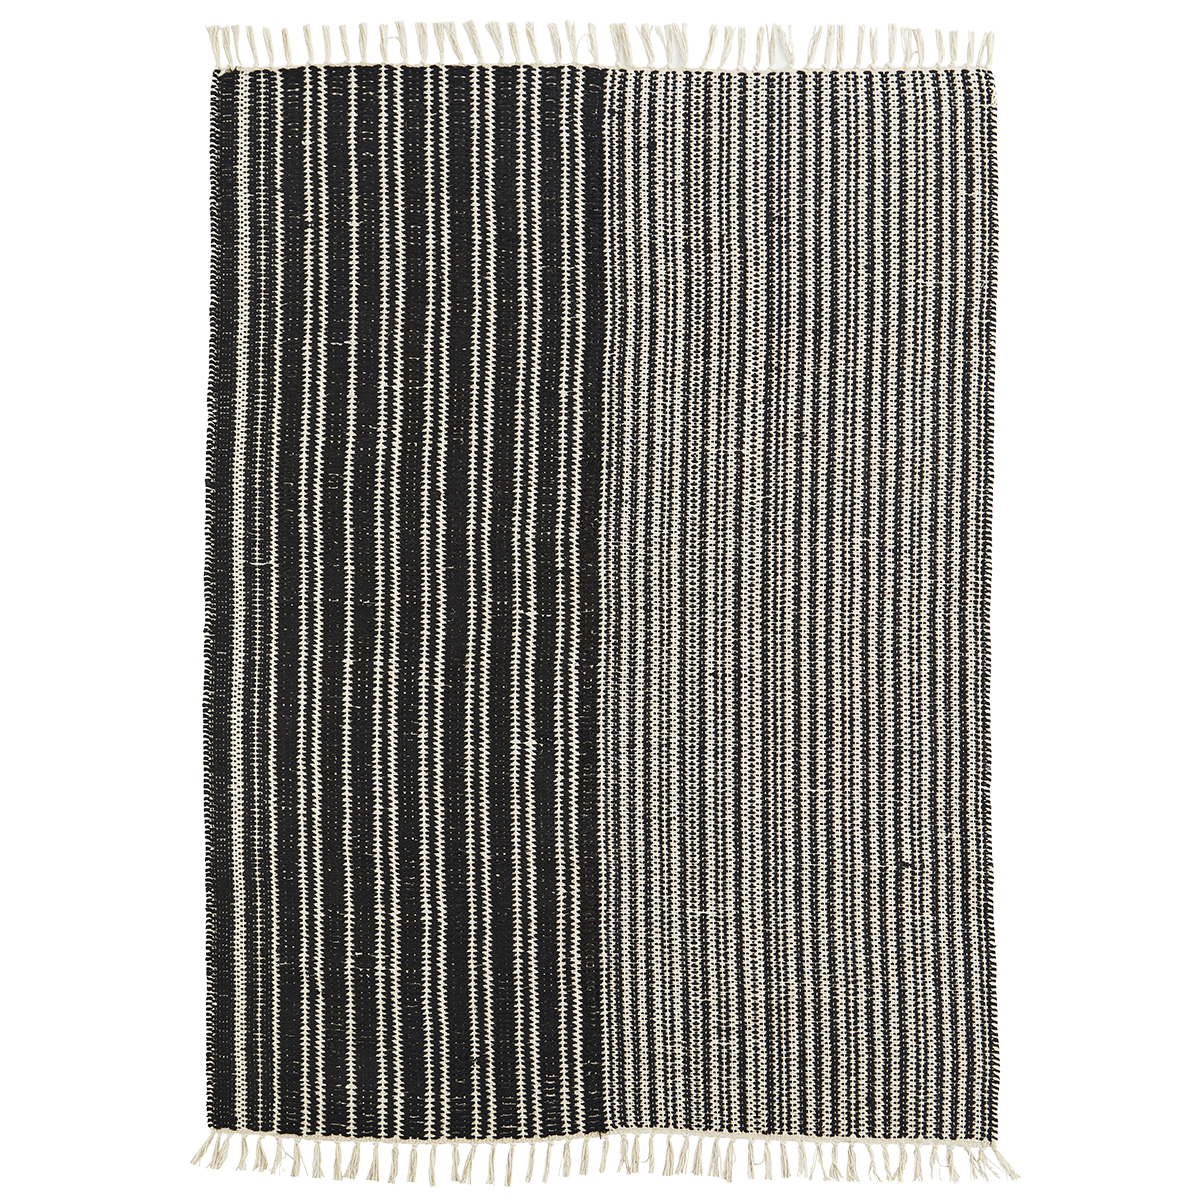 Striped handwoven cotton rug